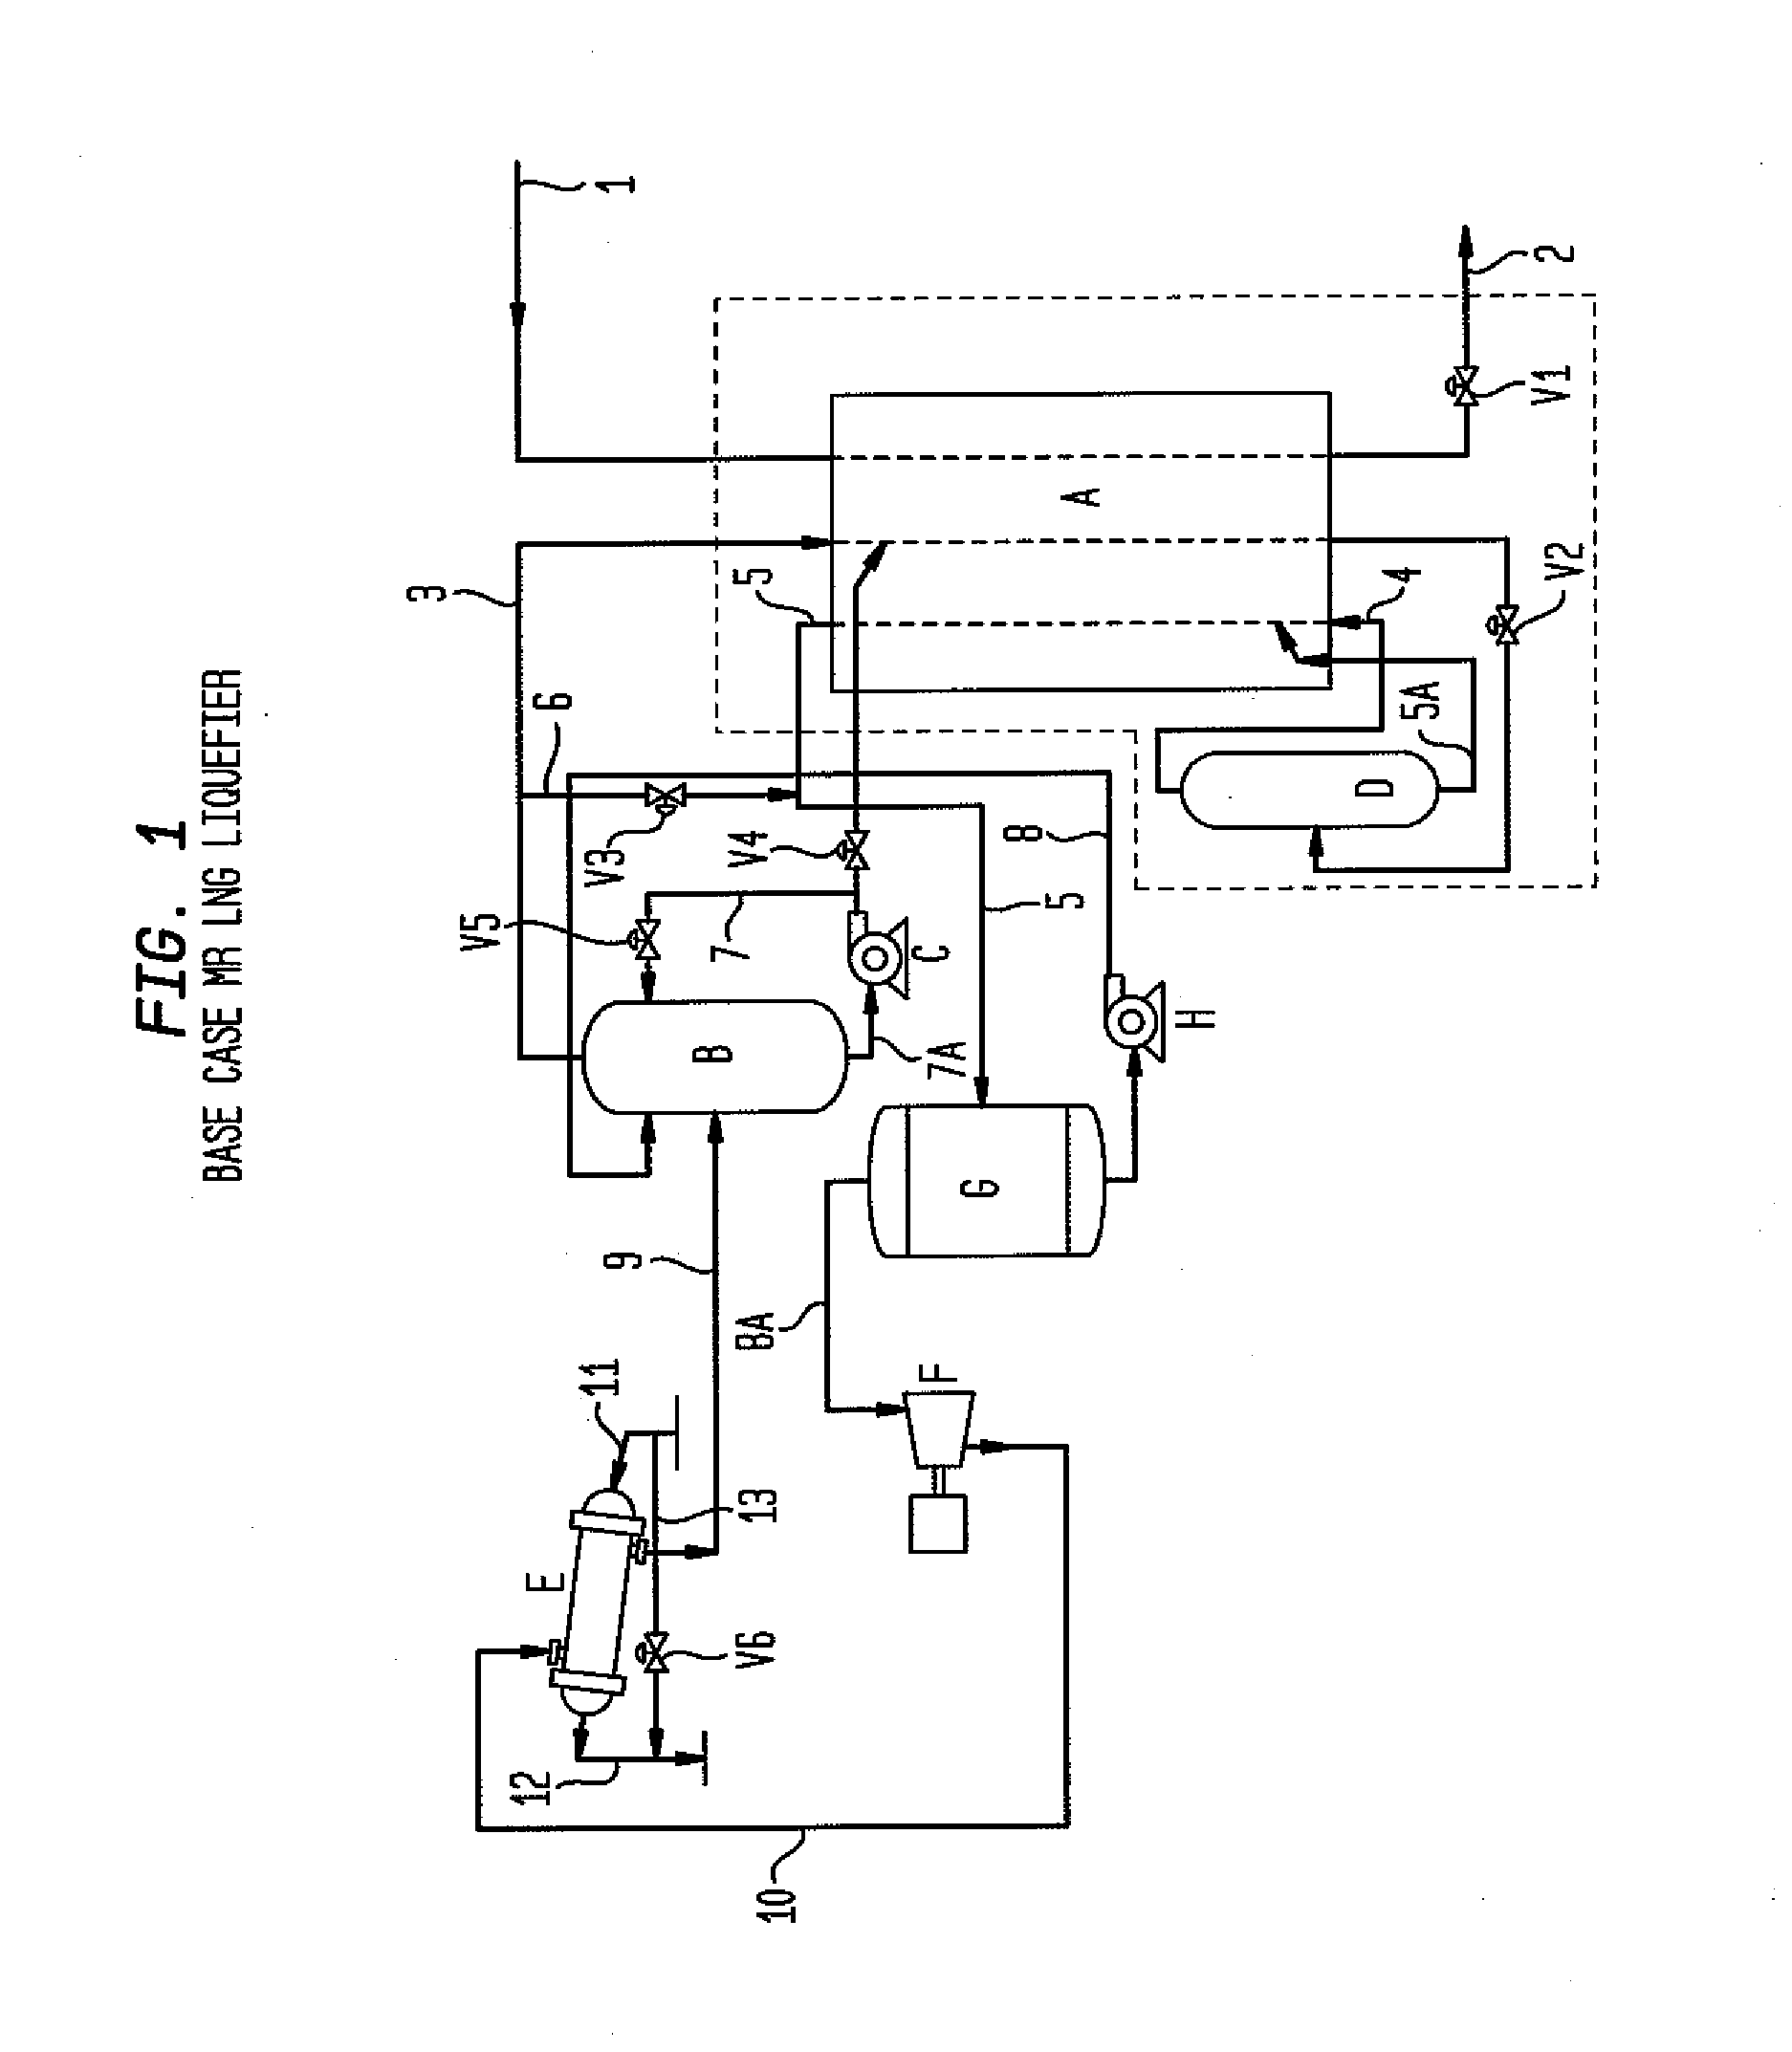 Nitrogen rejection and liquifier system for liquified natural gas production